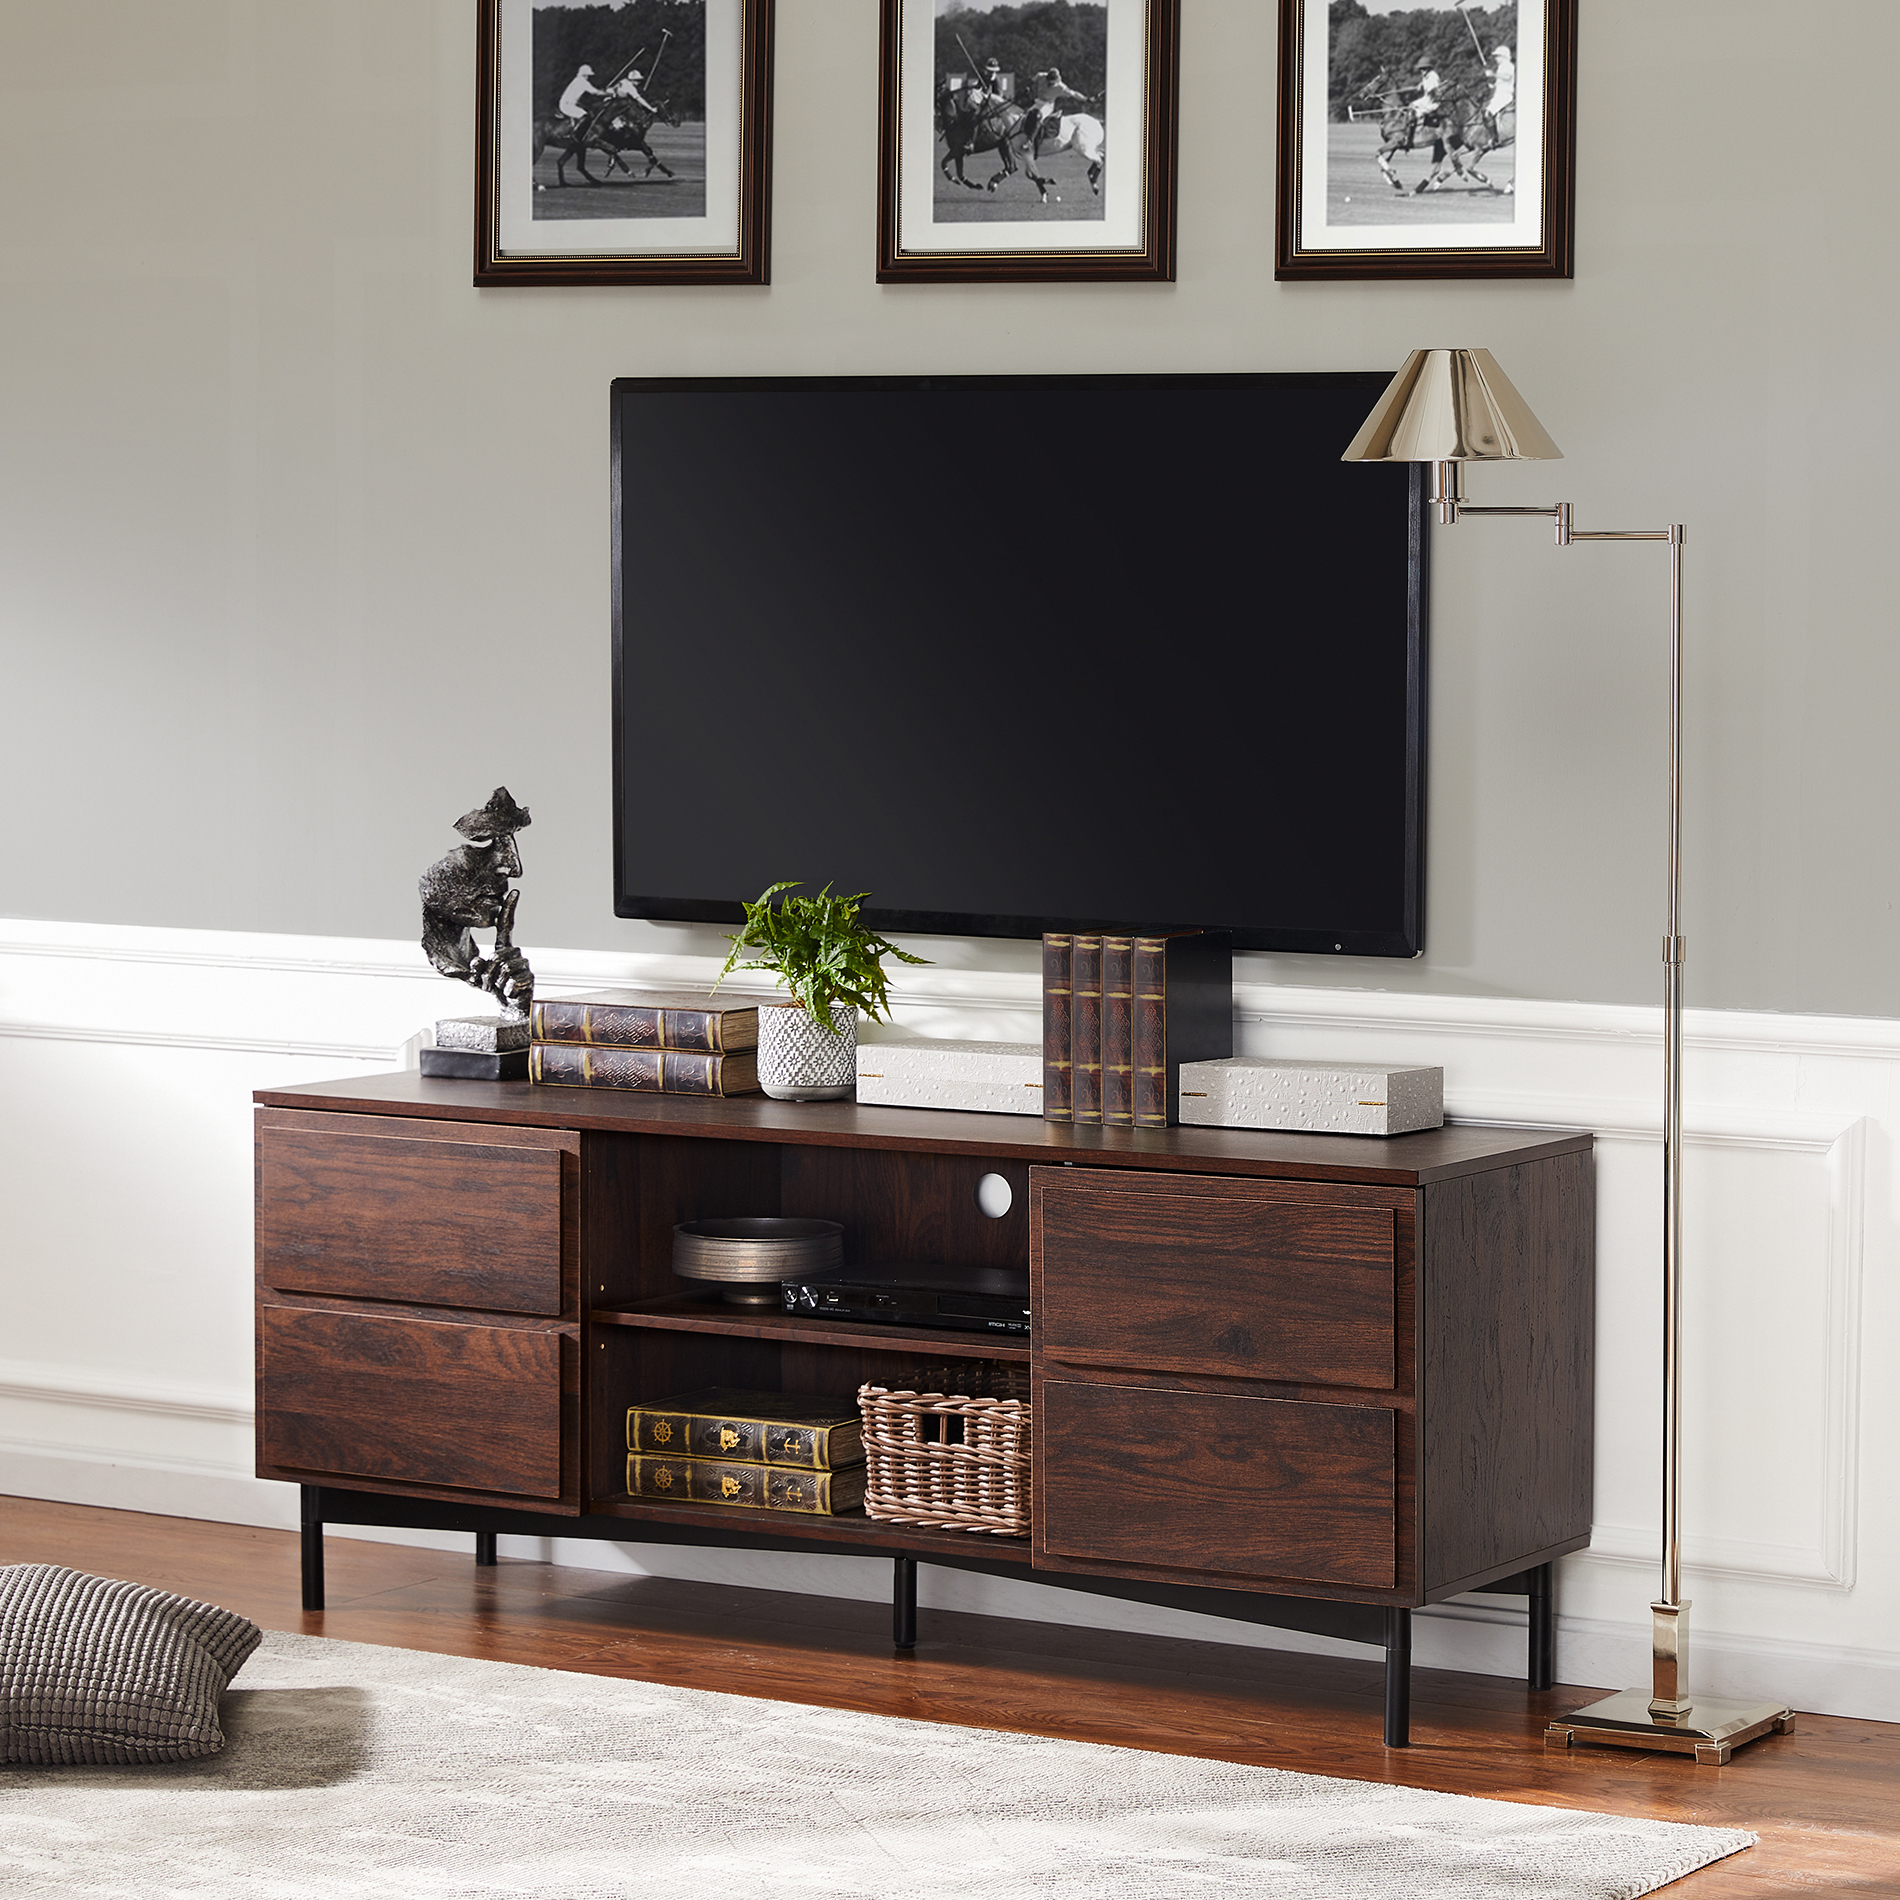 WAMPAT Mid-Century Modern TV Stand for up to 65'' Flat Screen, Wood TV Console Storage Cabinet, Retro Media Entertainment Center for Living Room Rustic Dark Walnut - image 2 of 7